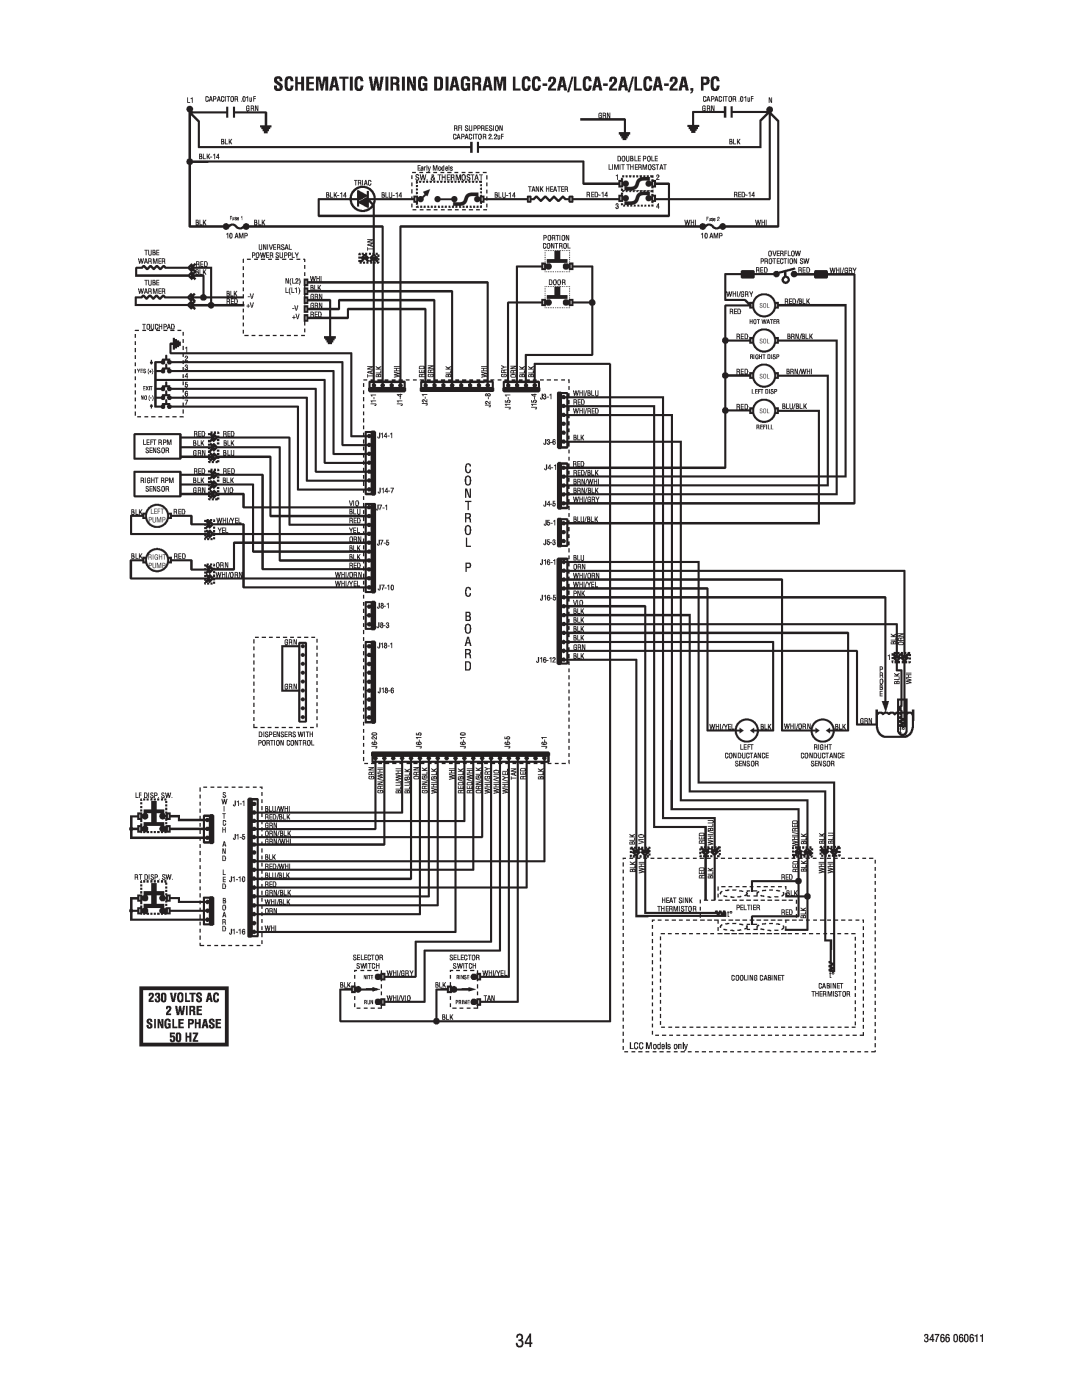 Bunn 34766.0000S manual SCHEMATIC WIRING DIAGRAM LCC-2A/LCA-2A/LCA-2A, PC, Volts Ac, Wire, Single Phase, 50 HZ 